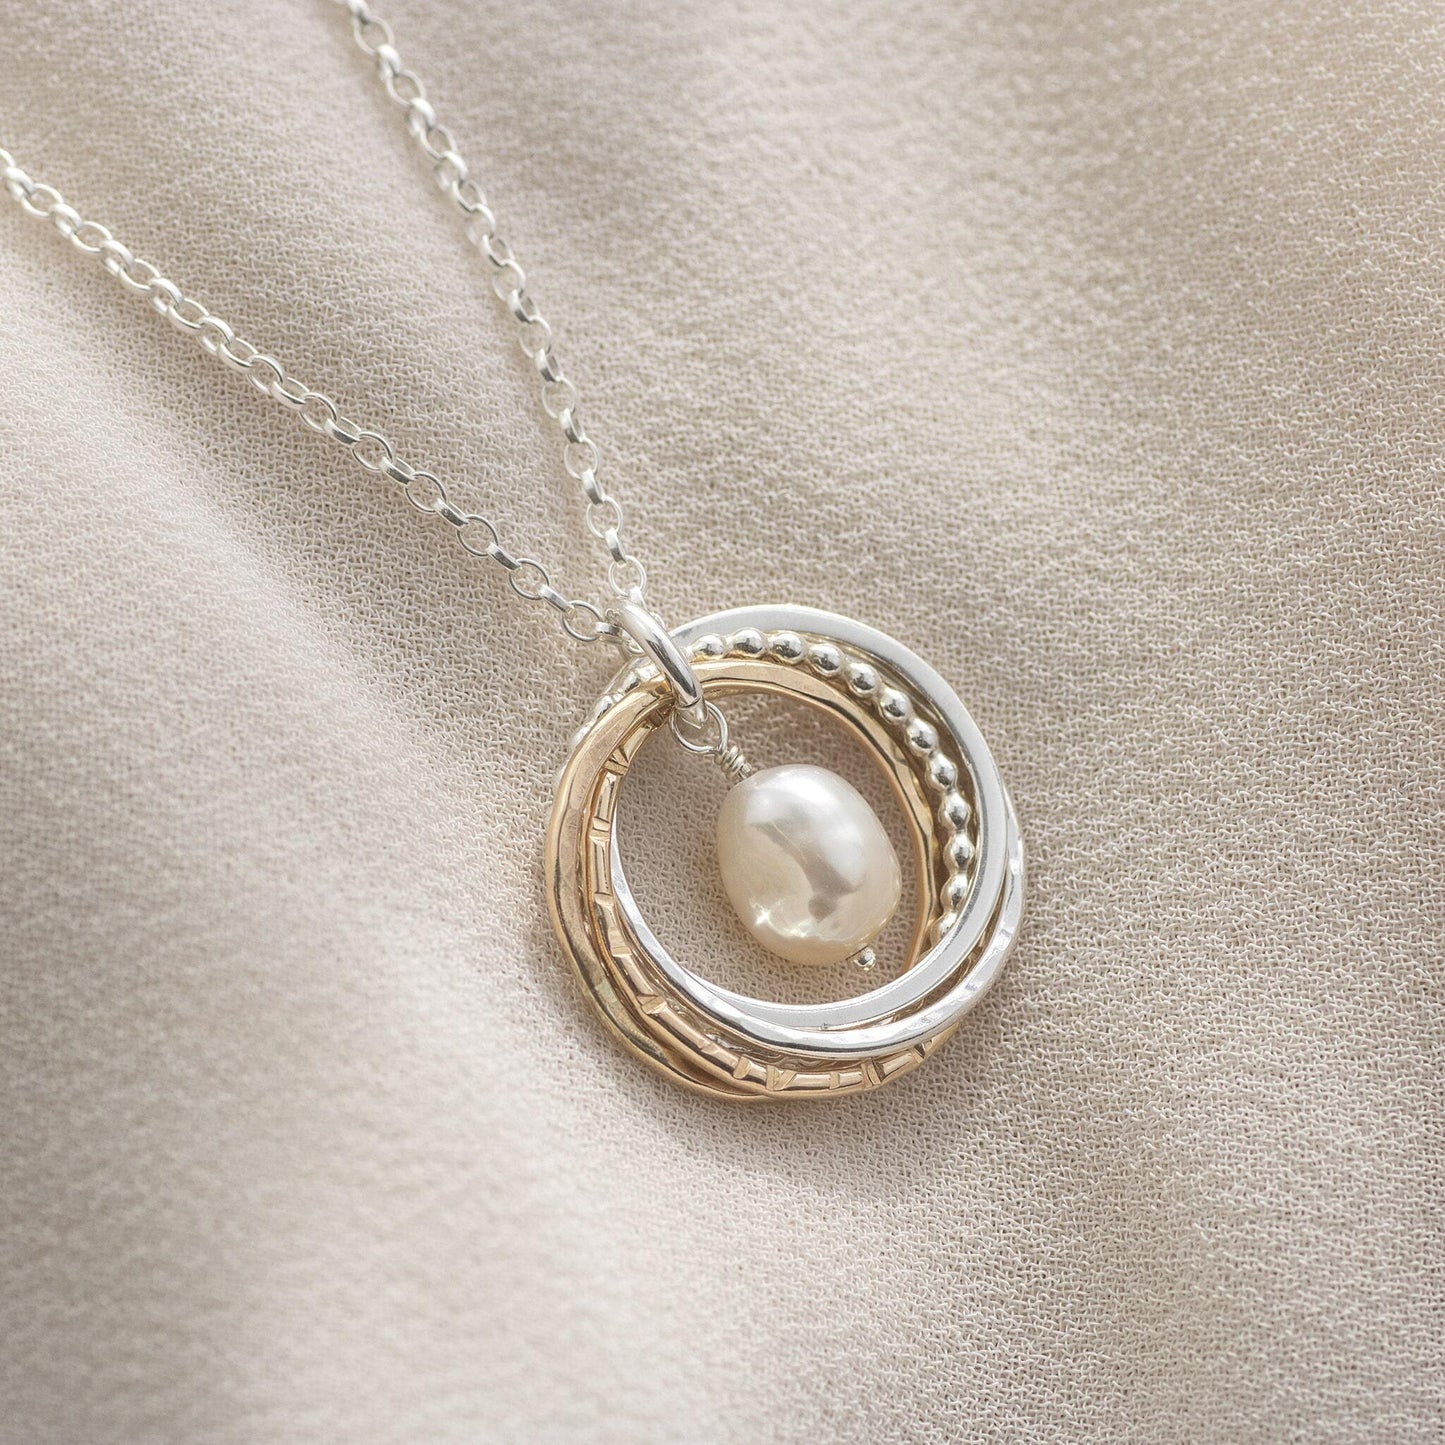 Gift for Mum - Links for Loved Ones Pearl Necklace - Silver & Gold